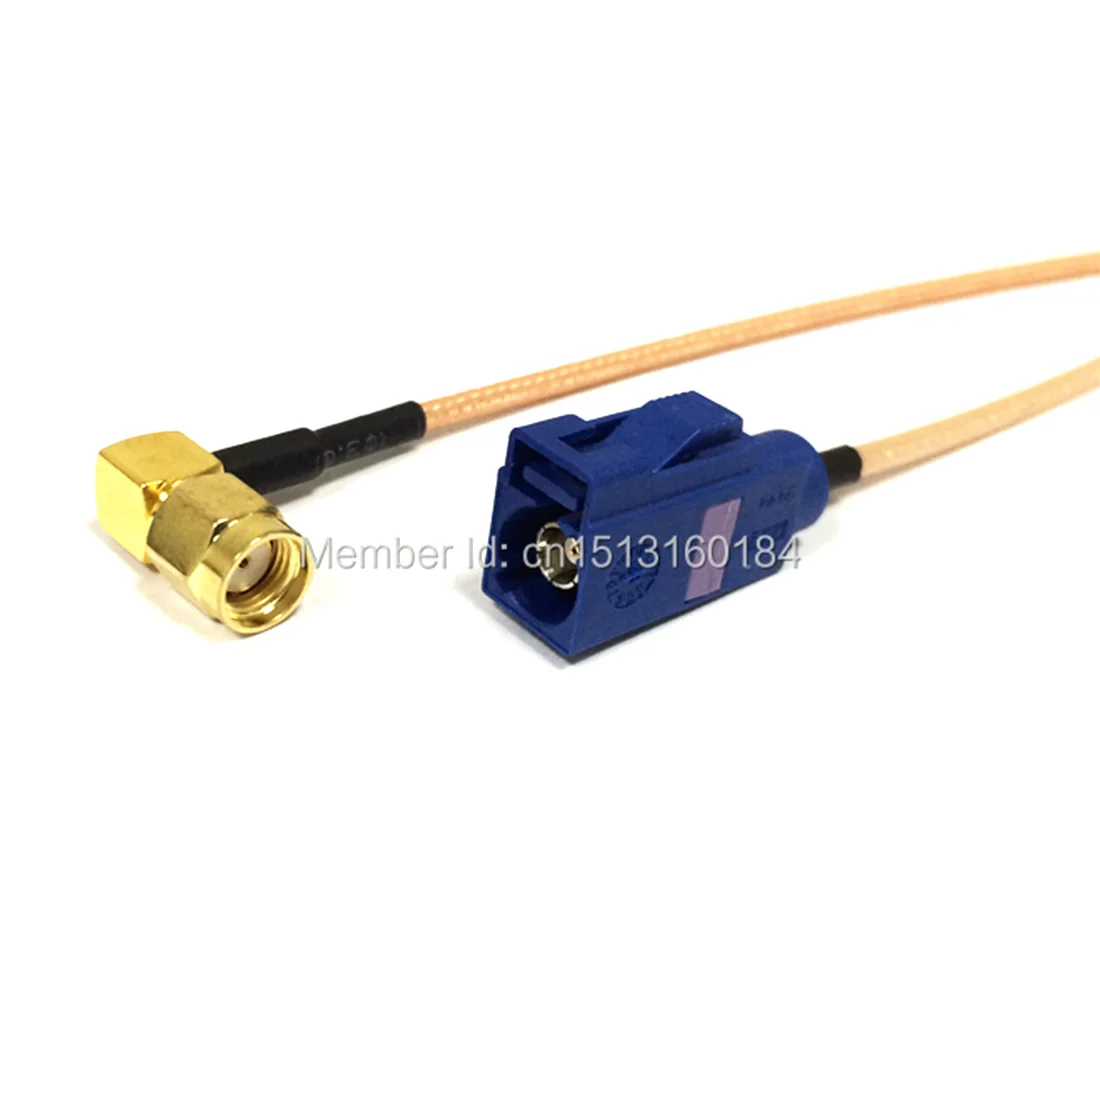 

New Modem Coaxial Cable RP-SMA Male Plug Right Angle To FAKRA Connector RG316 Cable 15CM 6inch Adapter RF Pigtail